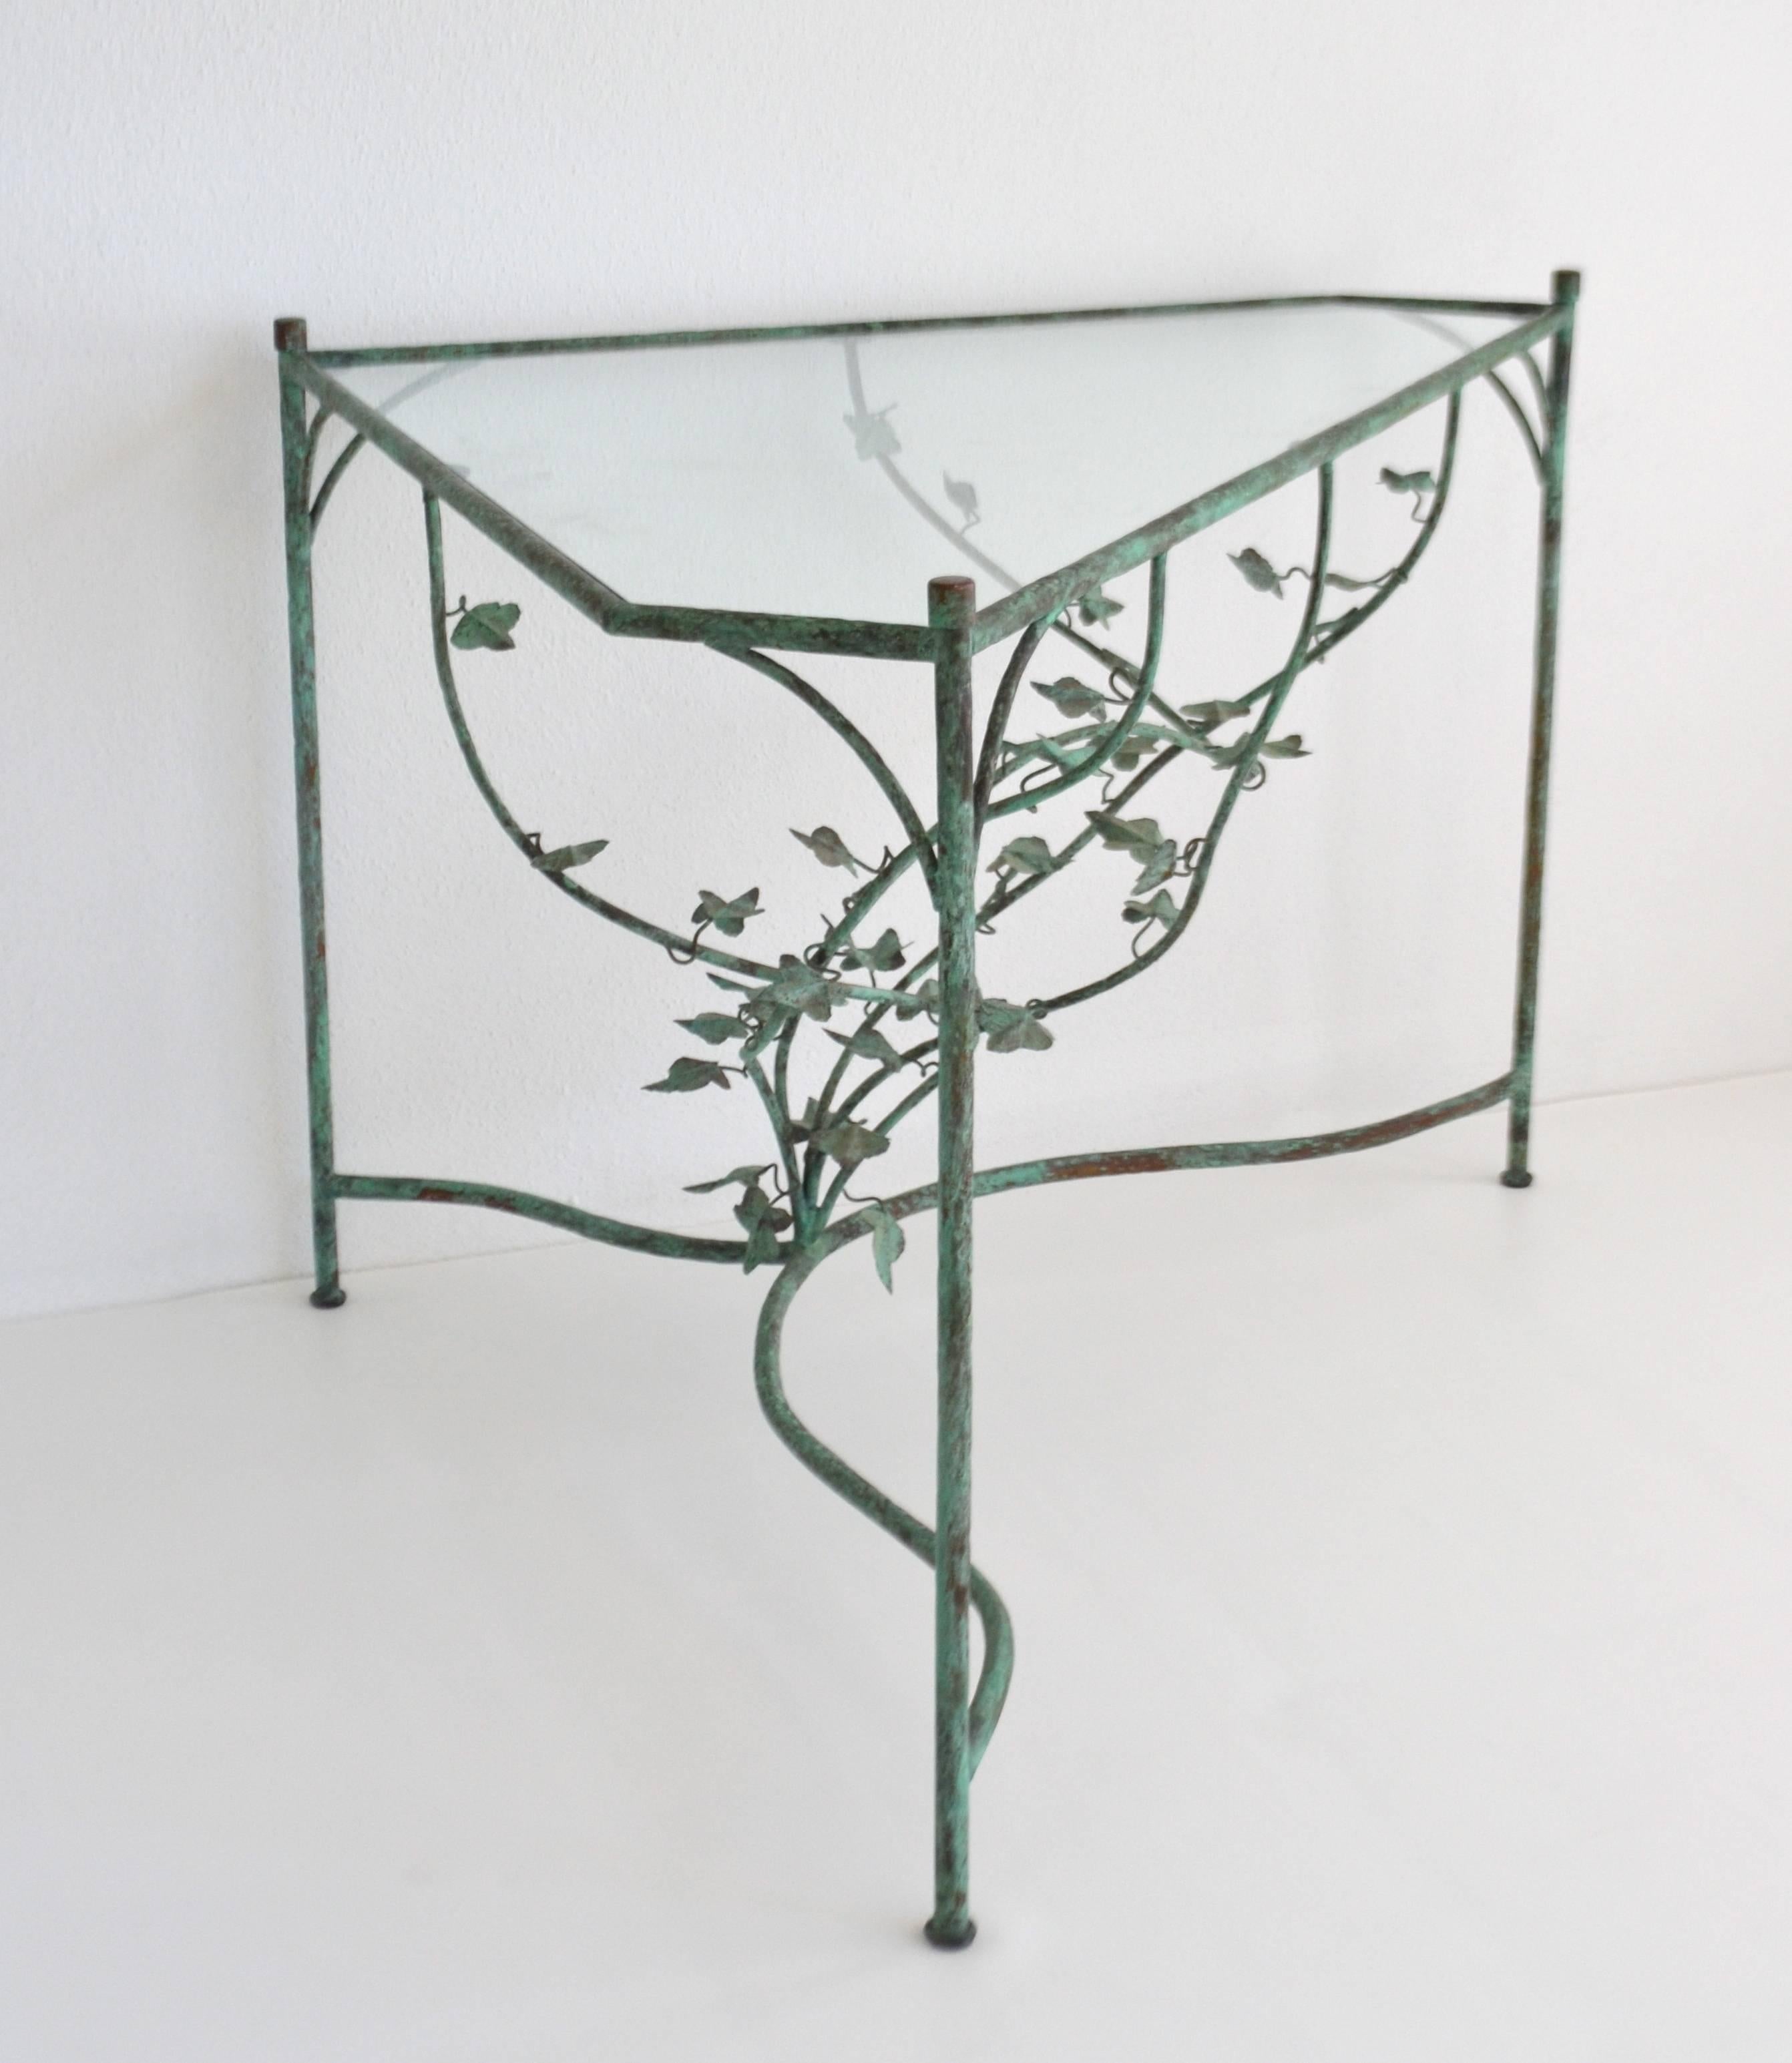 Hand-Wrought Verdigris Scrolling Vine Form Side Table or Console Table In Good Condition For Sale In West Palm Beach, FL